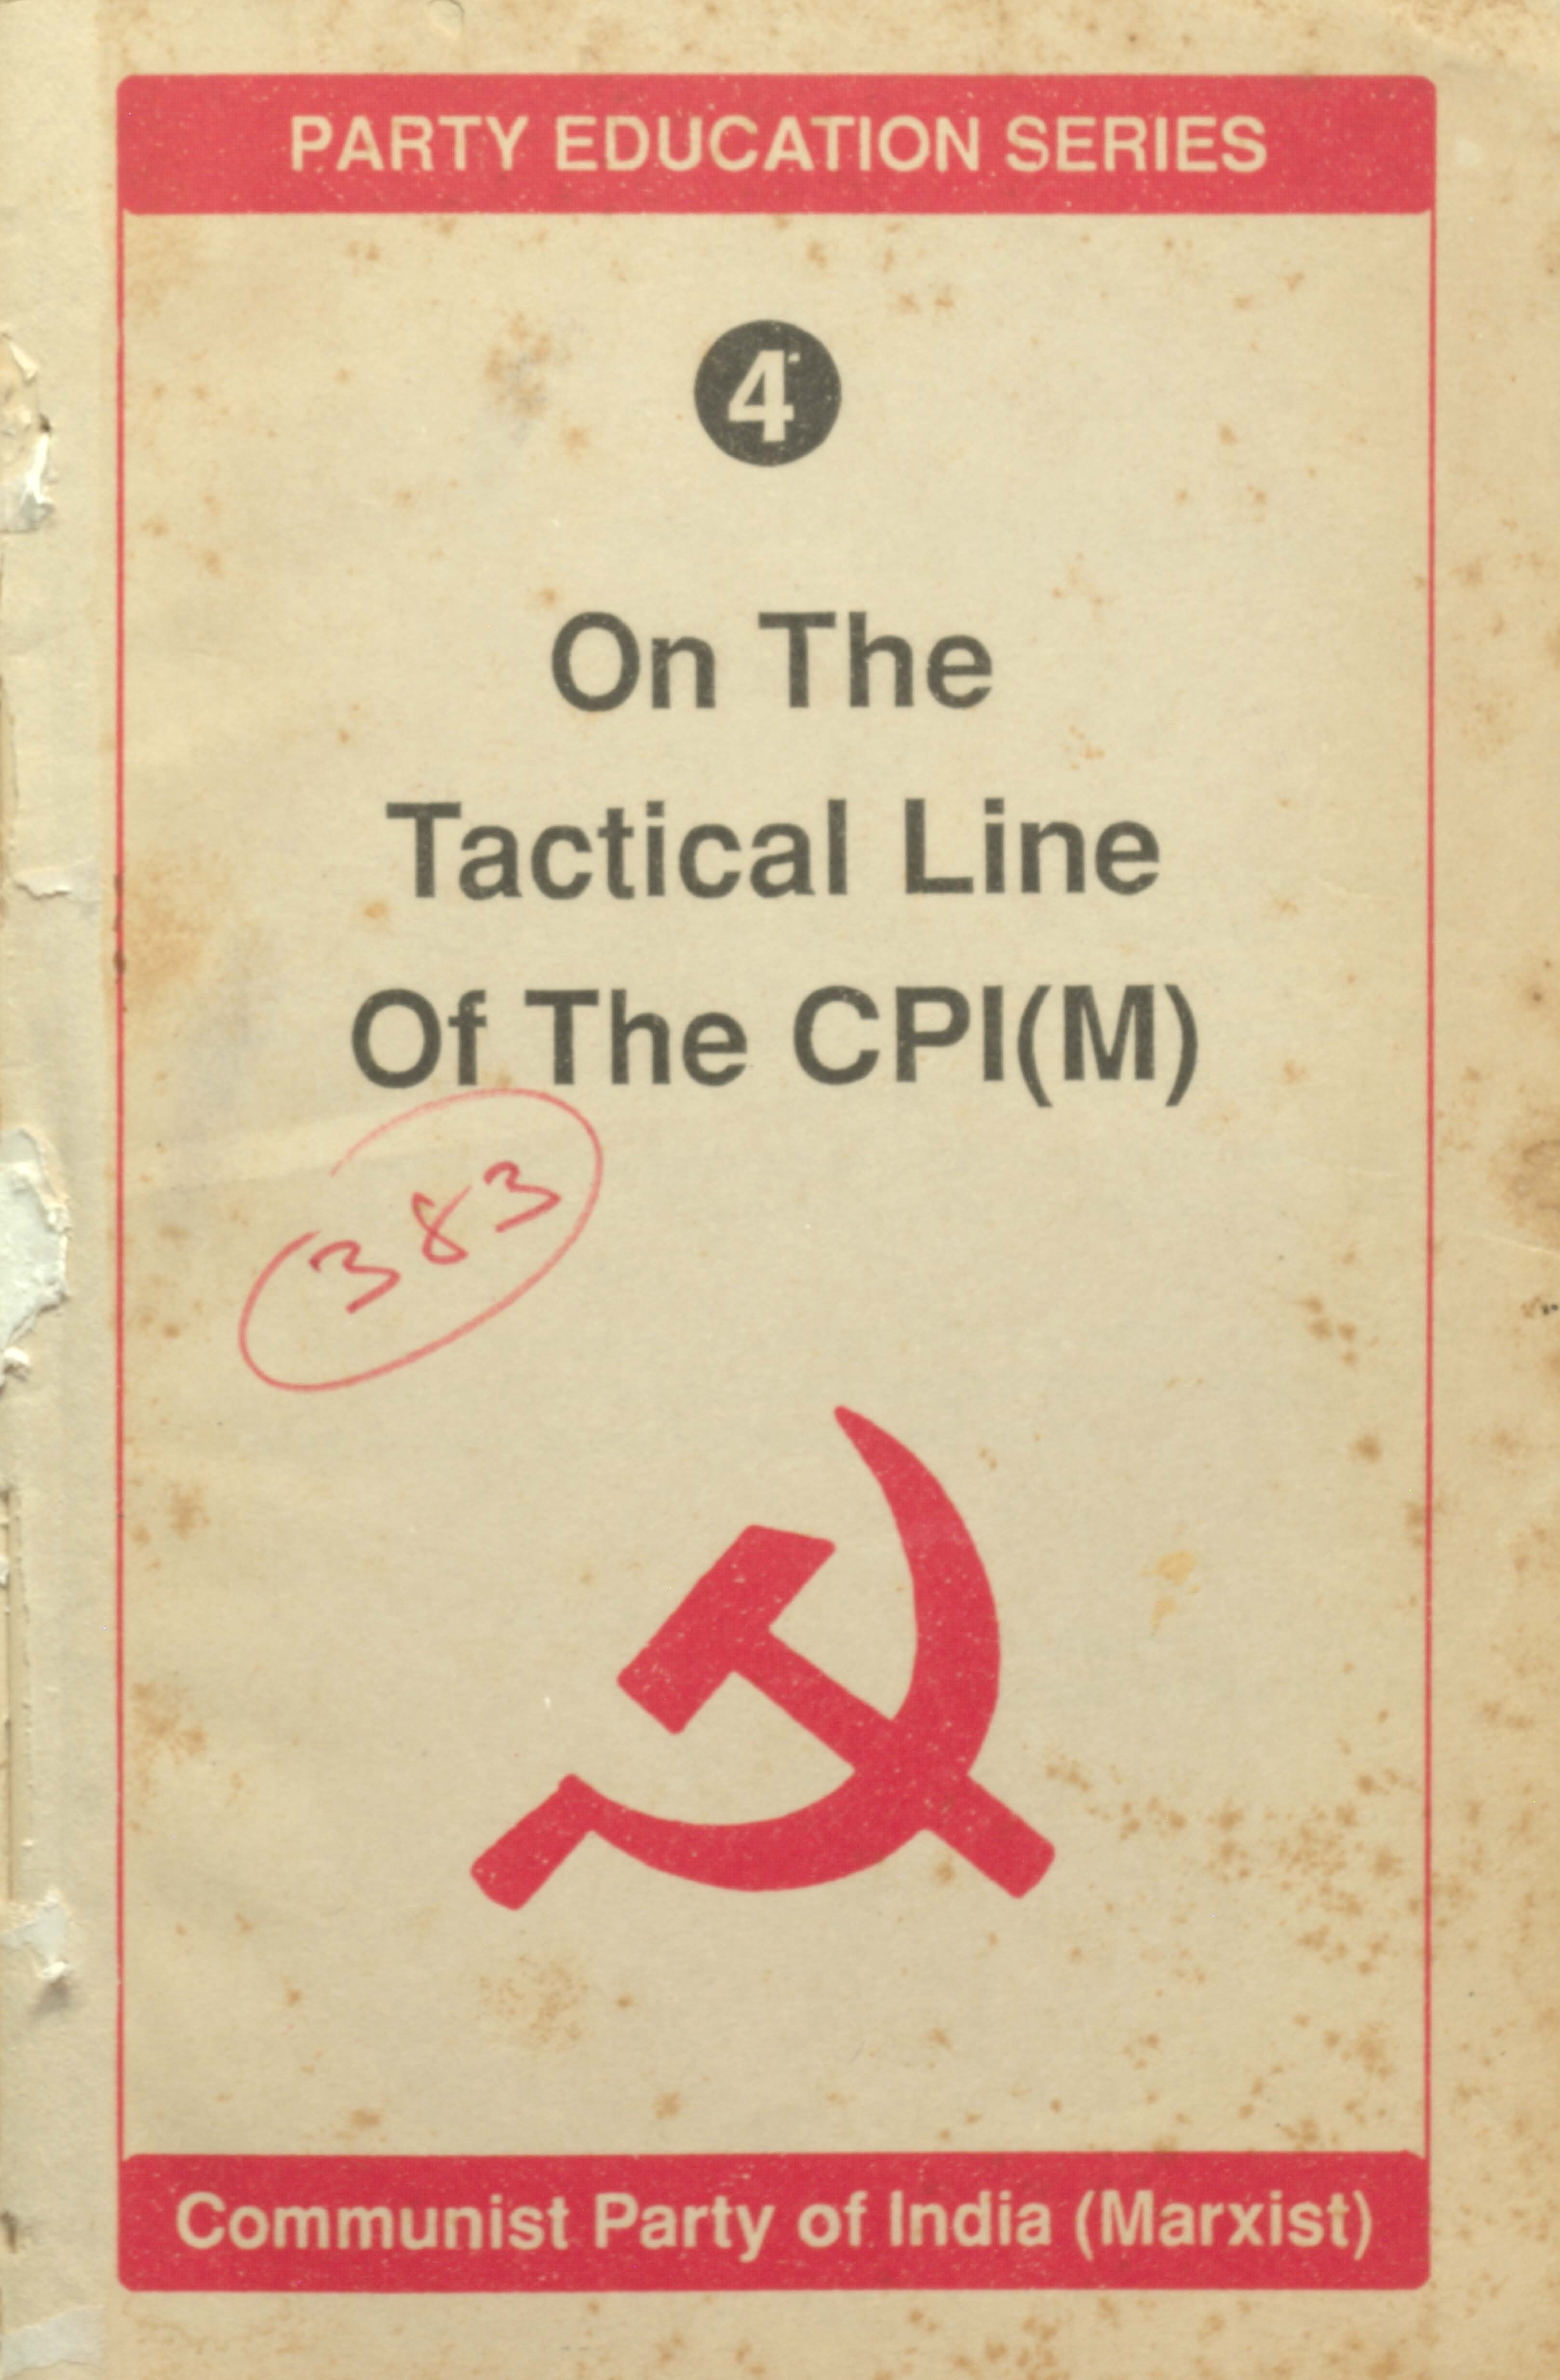 On The Tactical Line Of the CPI(M)